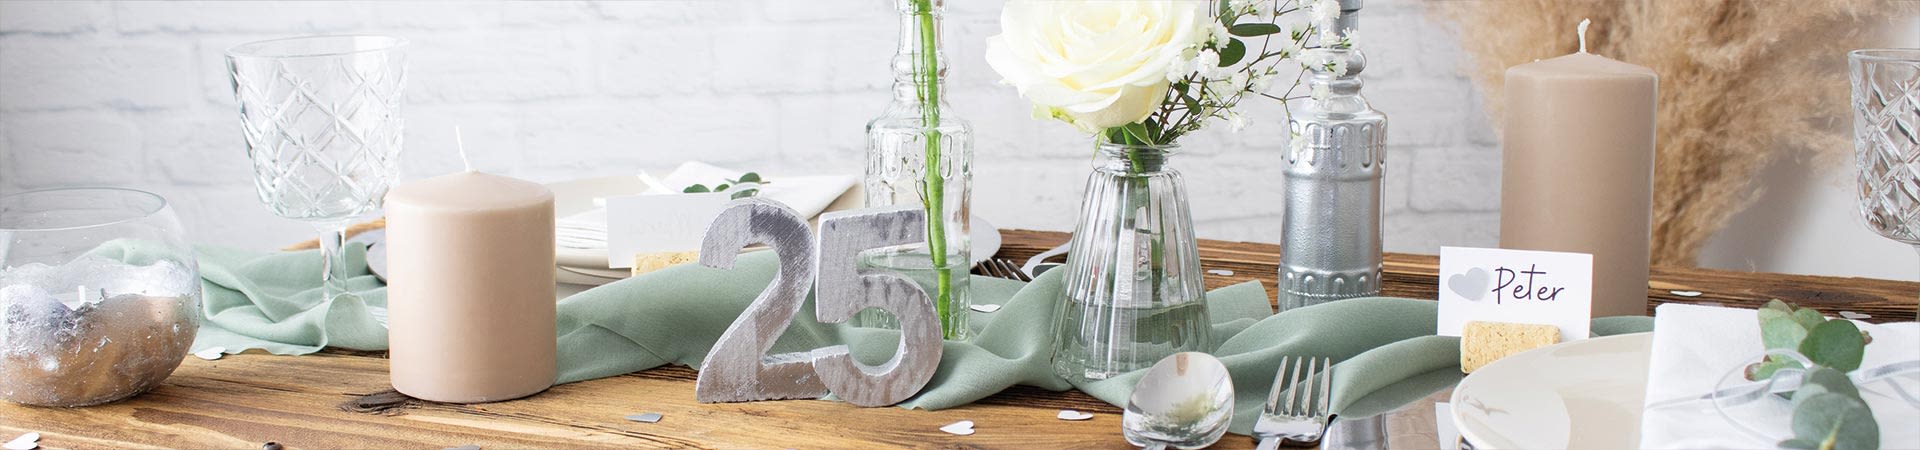 Silver wedding decoration ideas: a decorated table for a silver wedding anniversary.